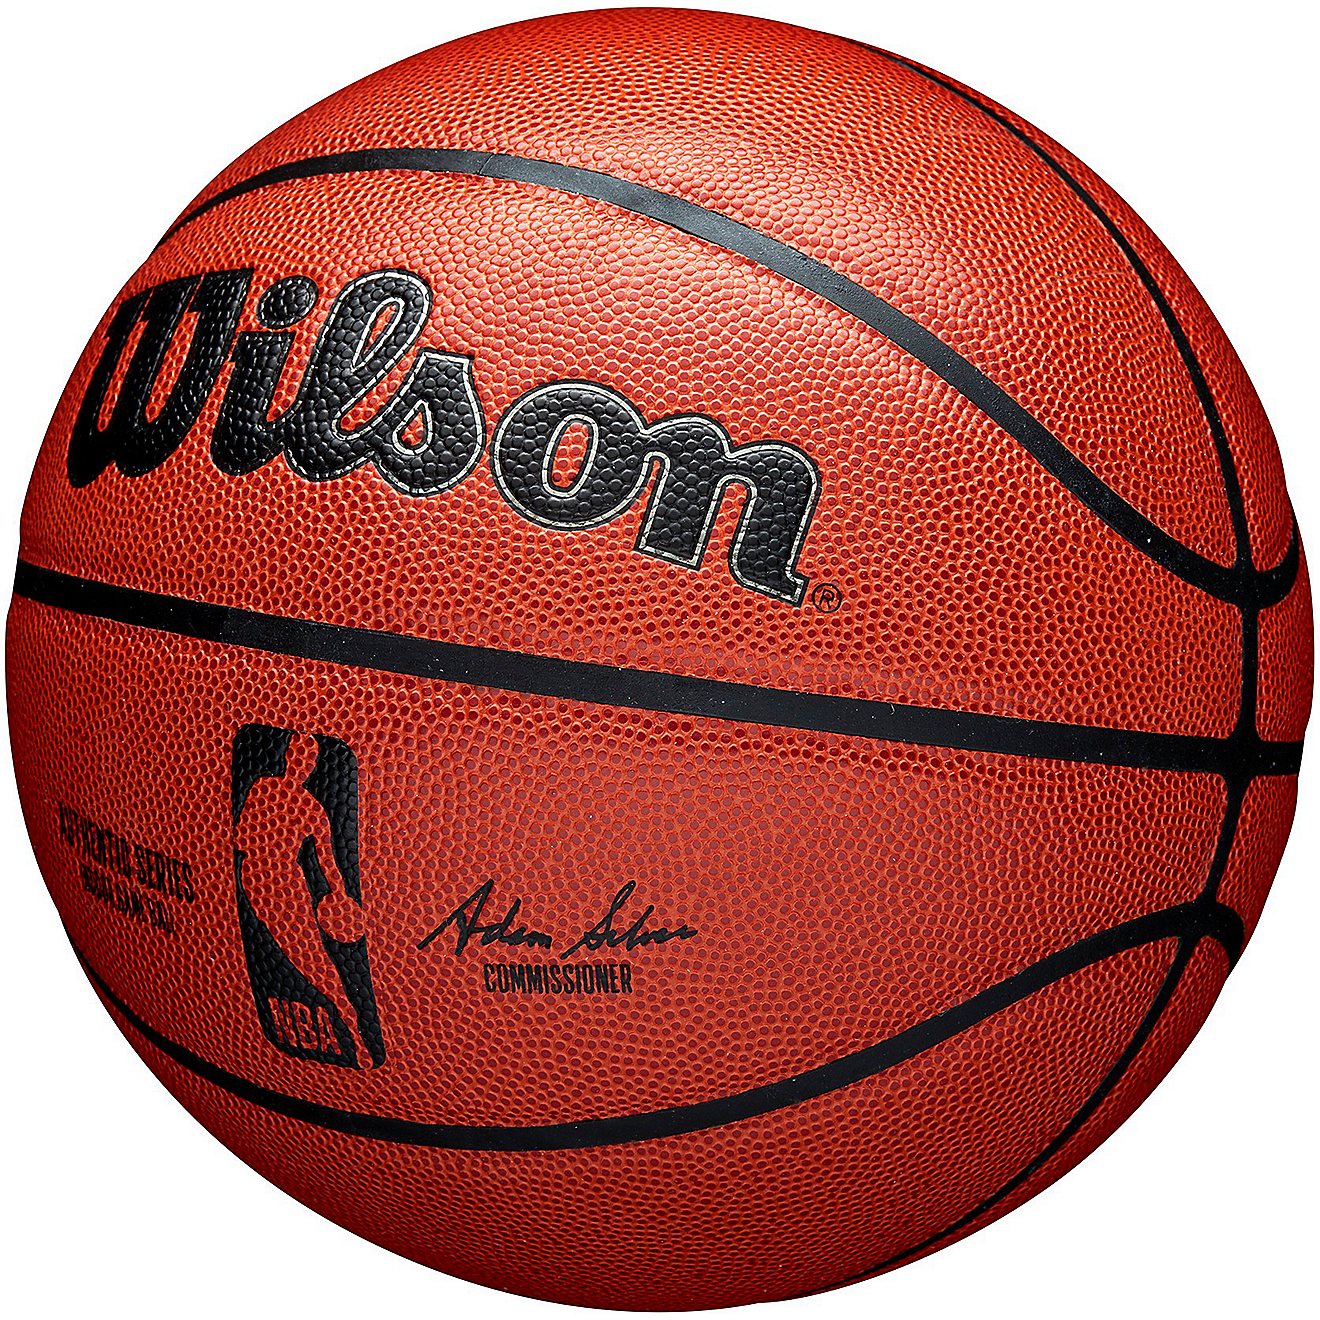 Wilson NBA Authentic Indoor Competition Basketball                                                                               - view number 2